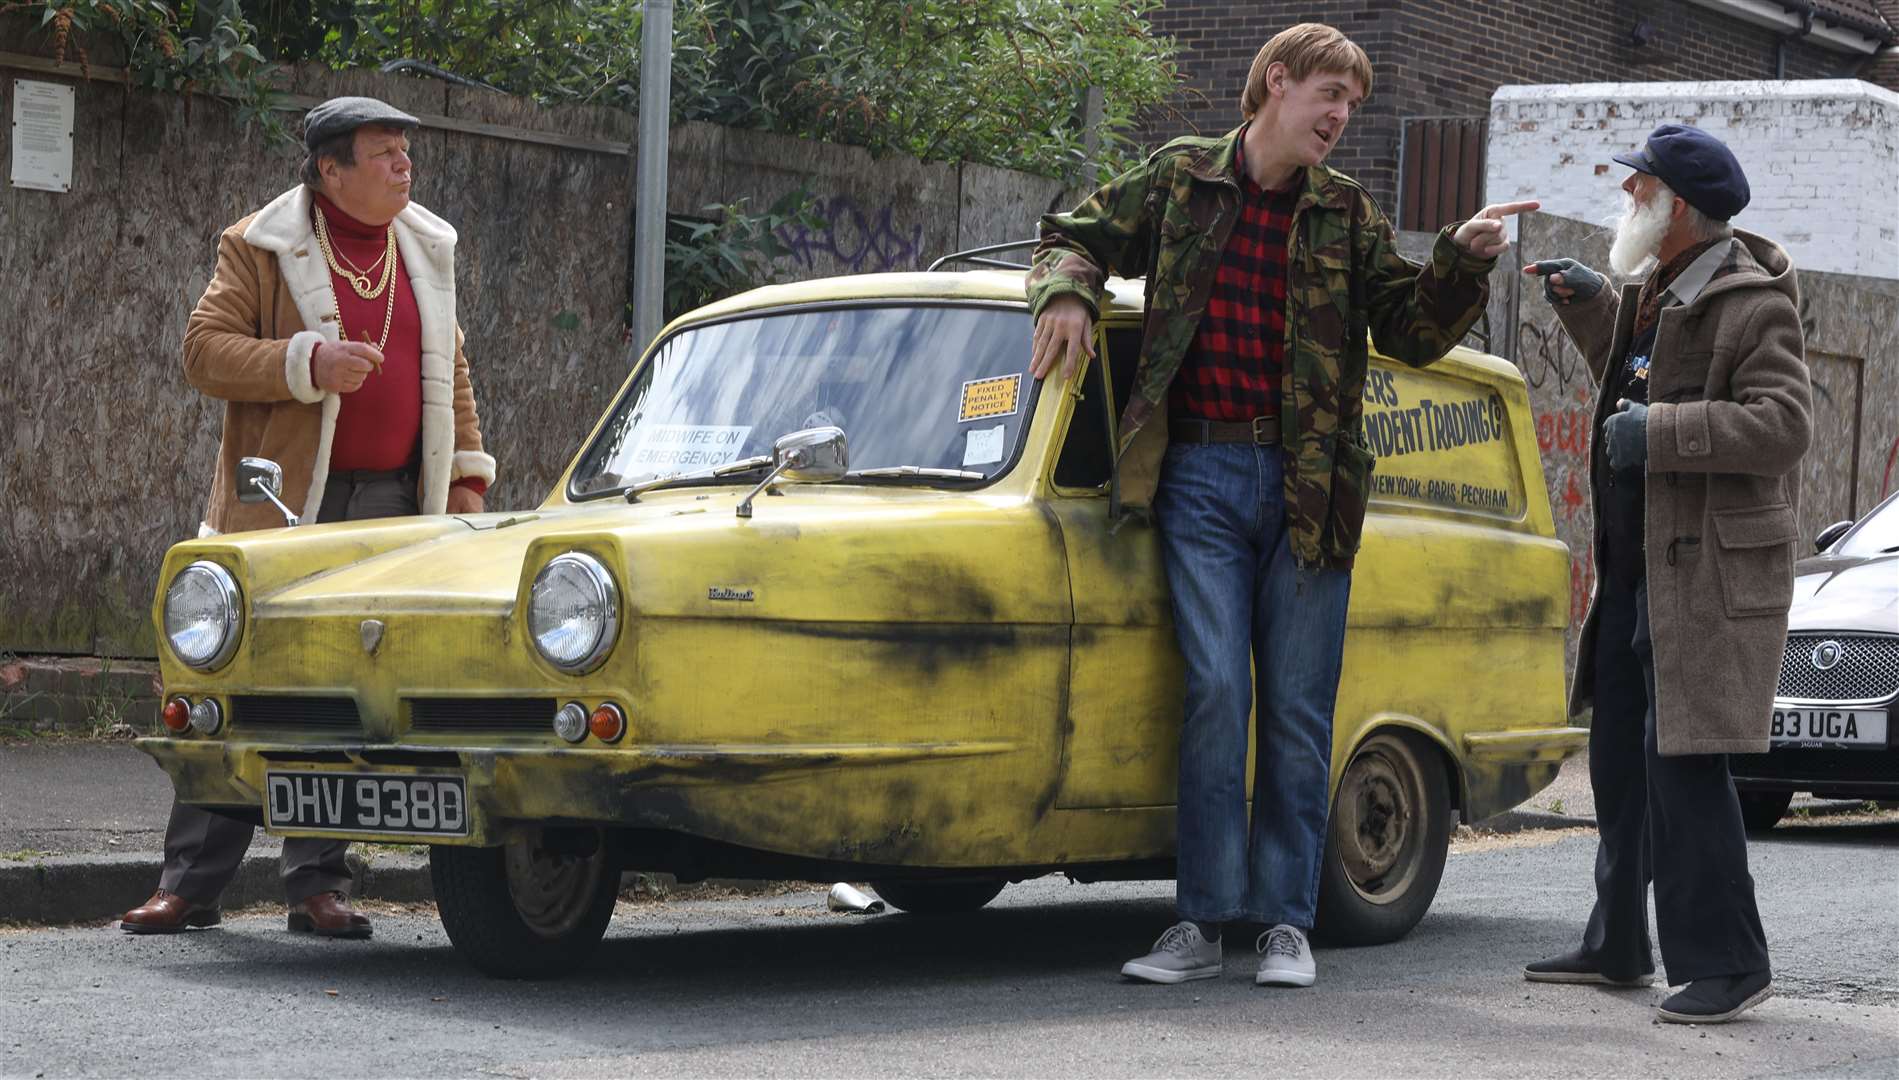 A recreation of Only Fools and Horses, photographed in Chatham